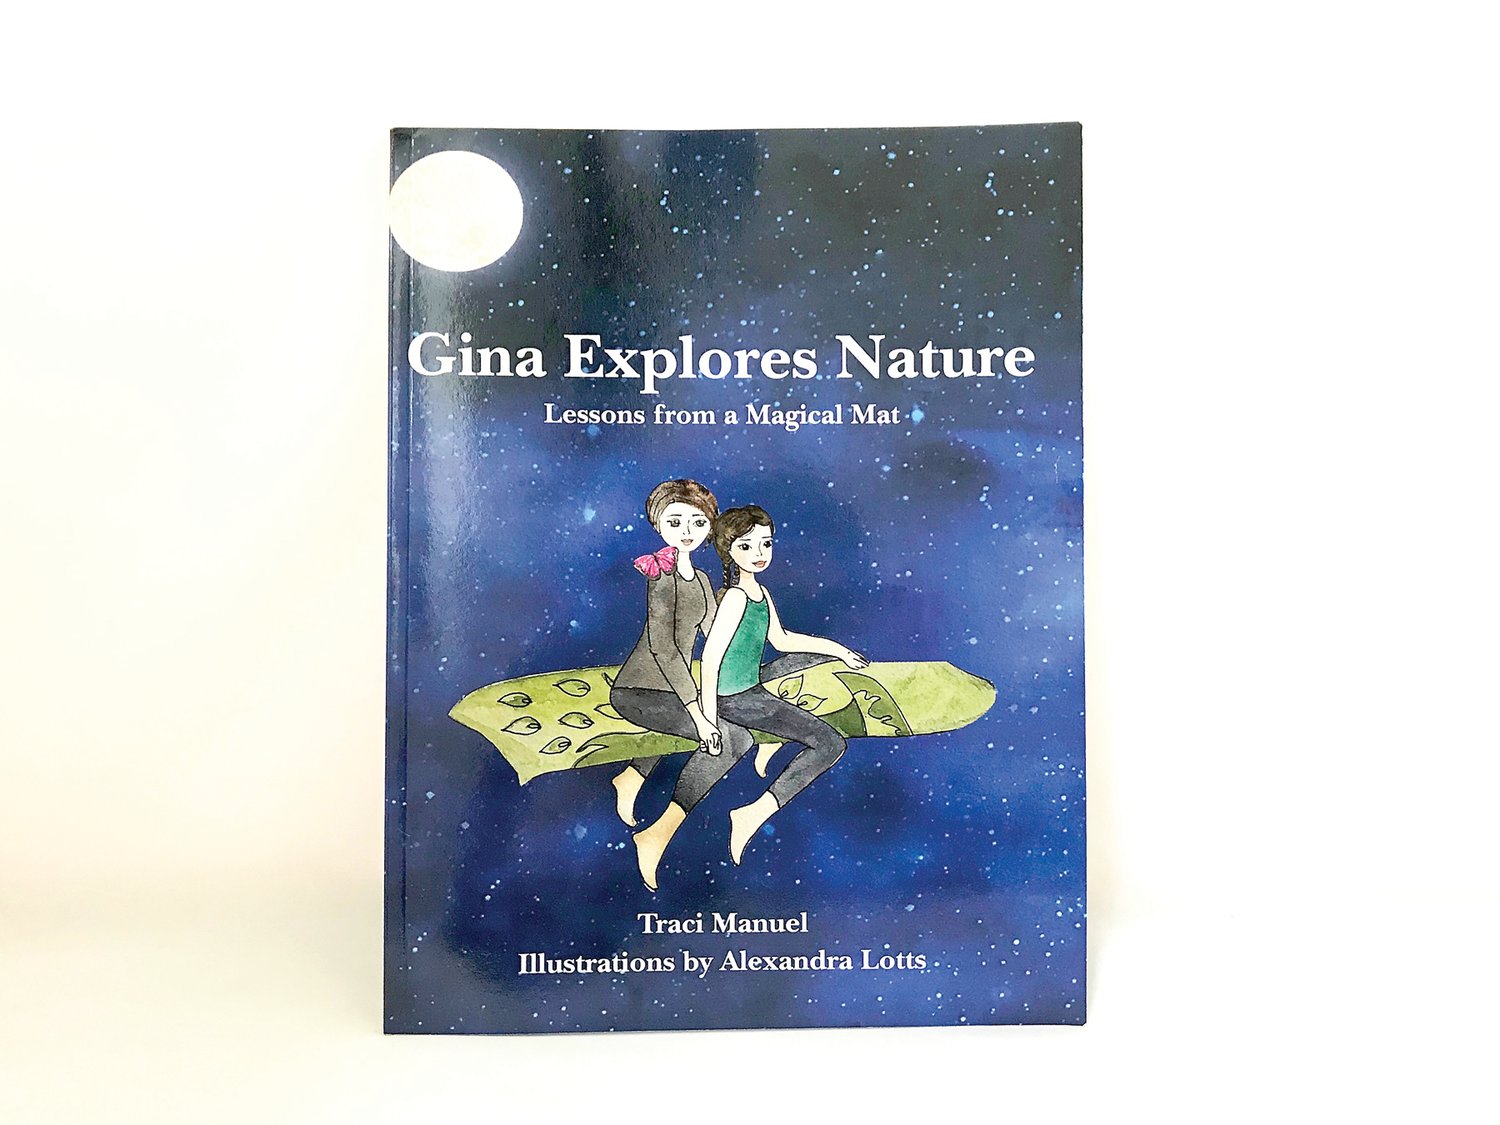 The cover of “Gina Explores Nature: Lessons from a Magical Mat,” written by Traci Manuel and illustrated by Alexandra Lotts.